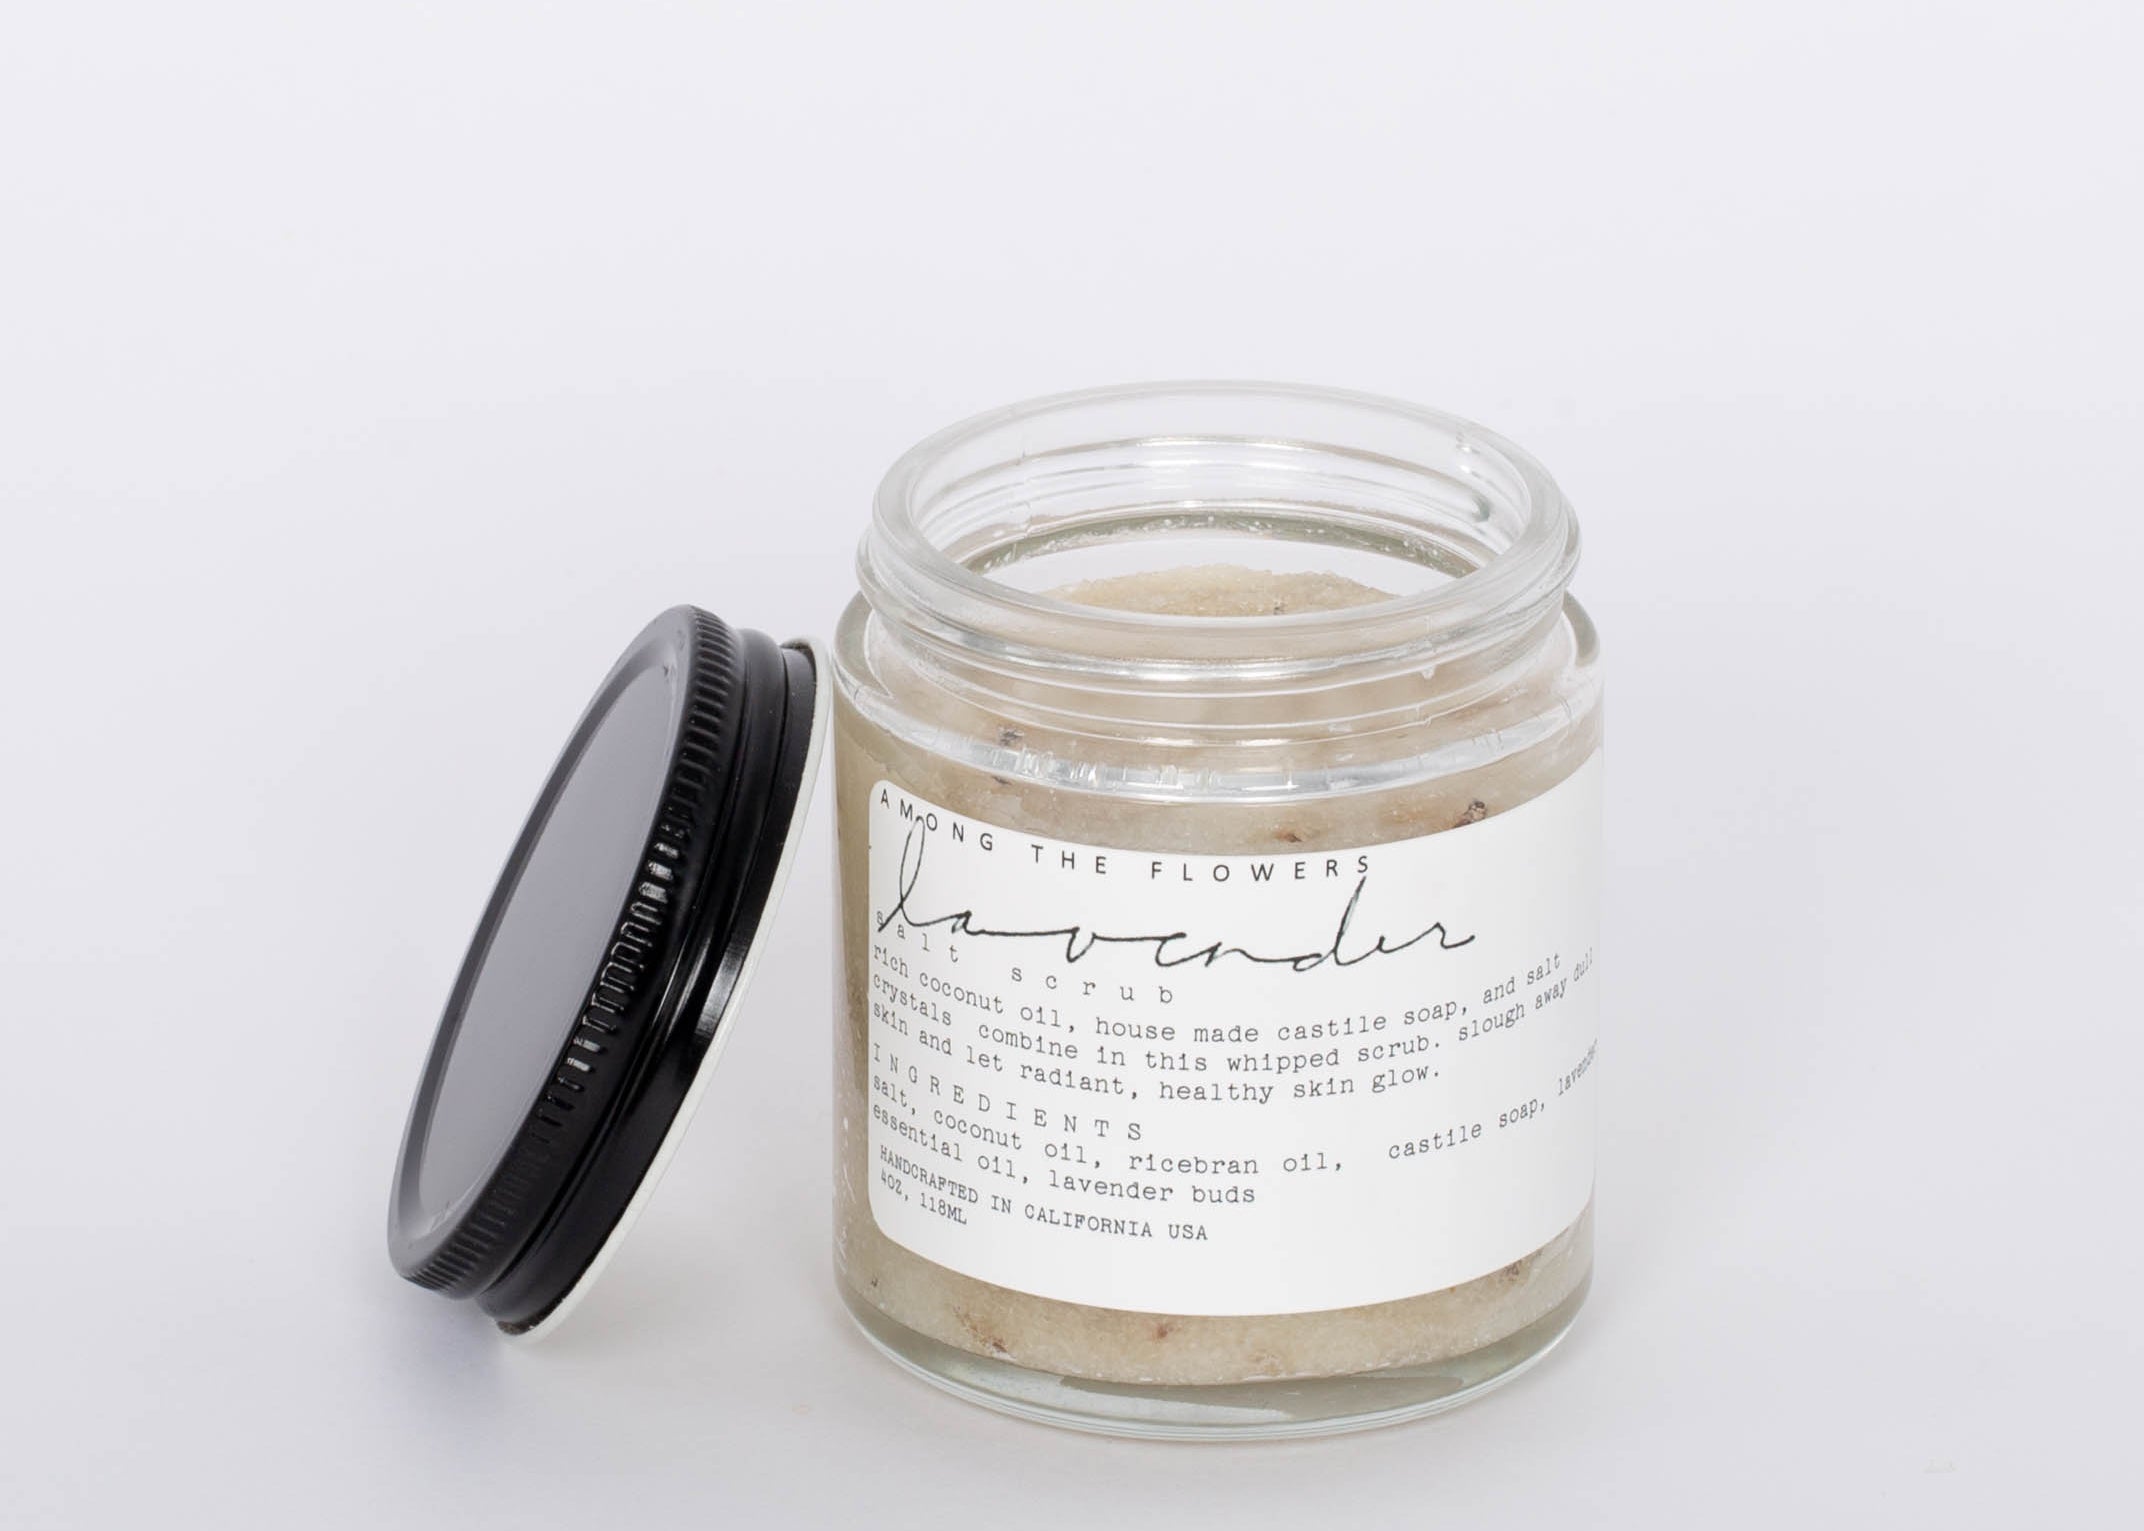 Lavennder Moisturizing Whipped Salt Scrub. A whipped salt, coconut oil, and castile soap scrub infused with essential oils and botanical extracts for absorption and added nutrients. Our soap base cleans while rich coconut oil moisturizes, and salt sloughs away dead skin.